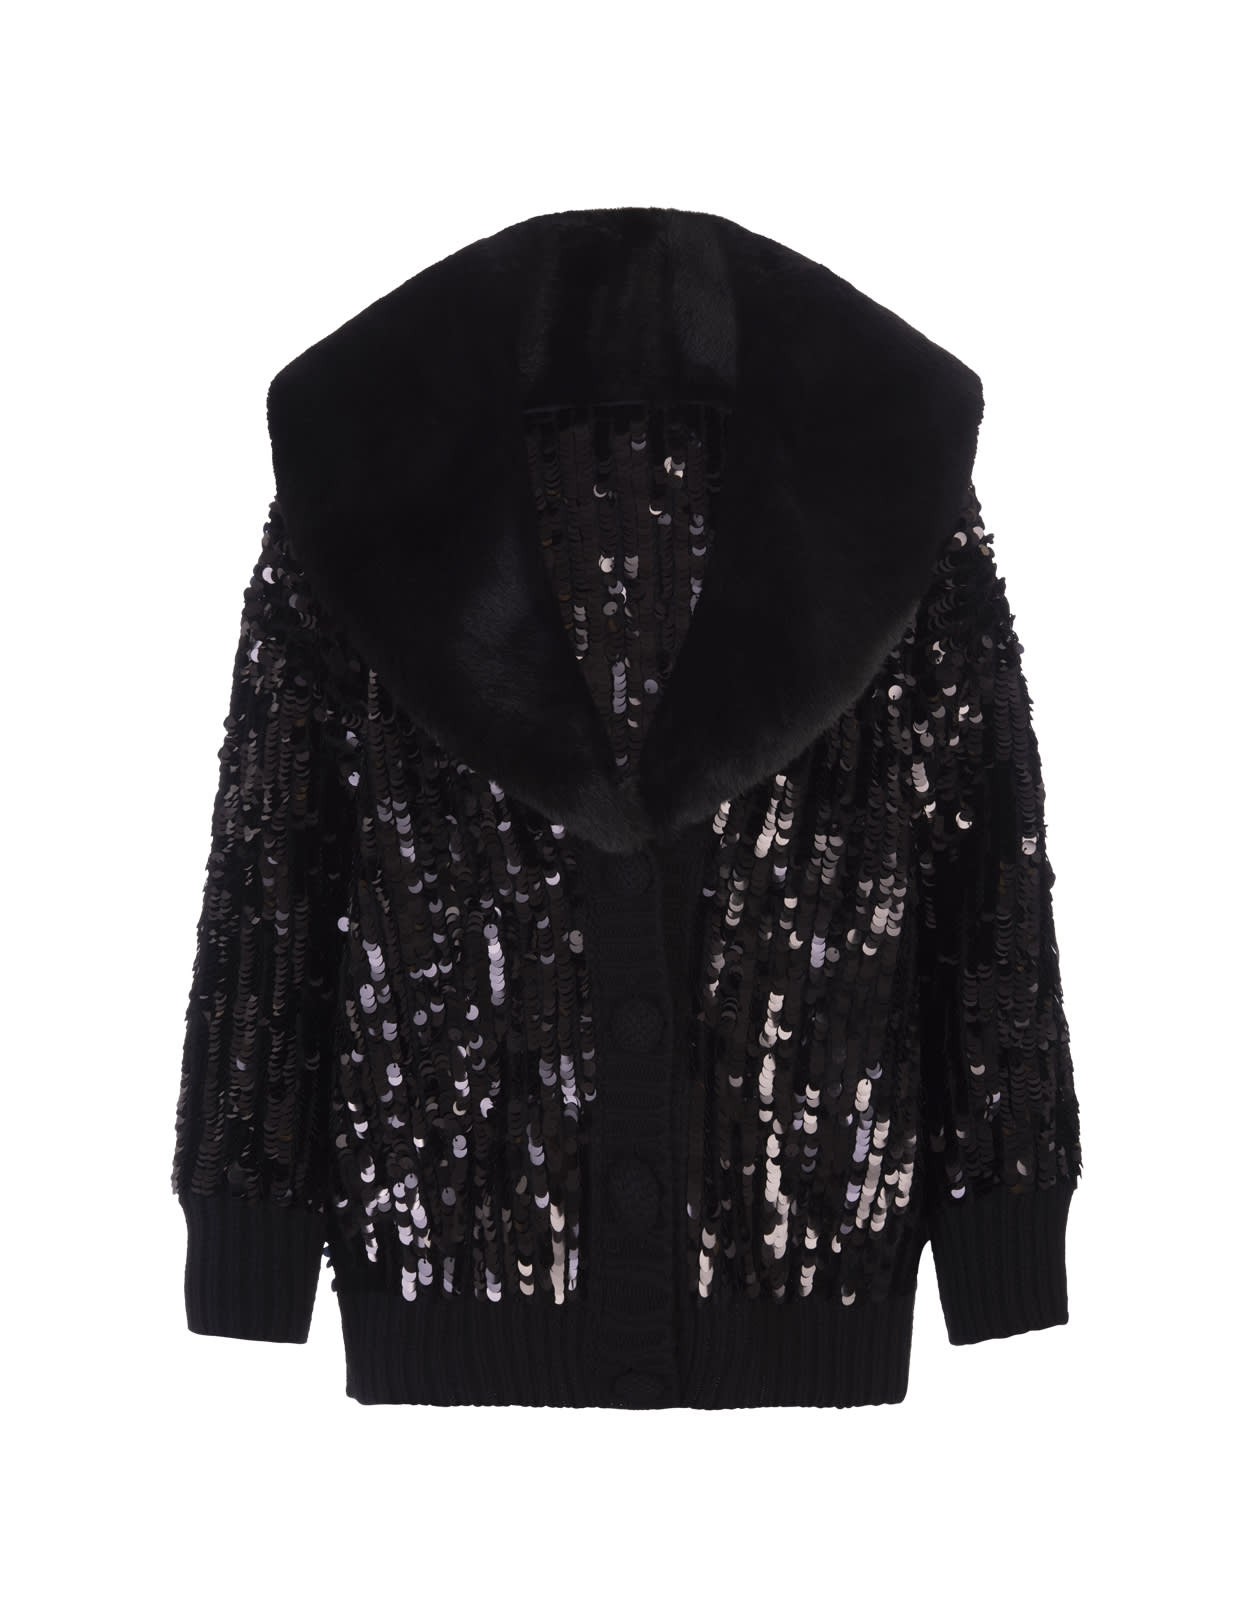 Blumarine Woman Black Cardigan With Sequins Embroidery